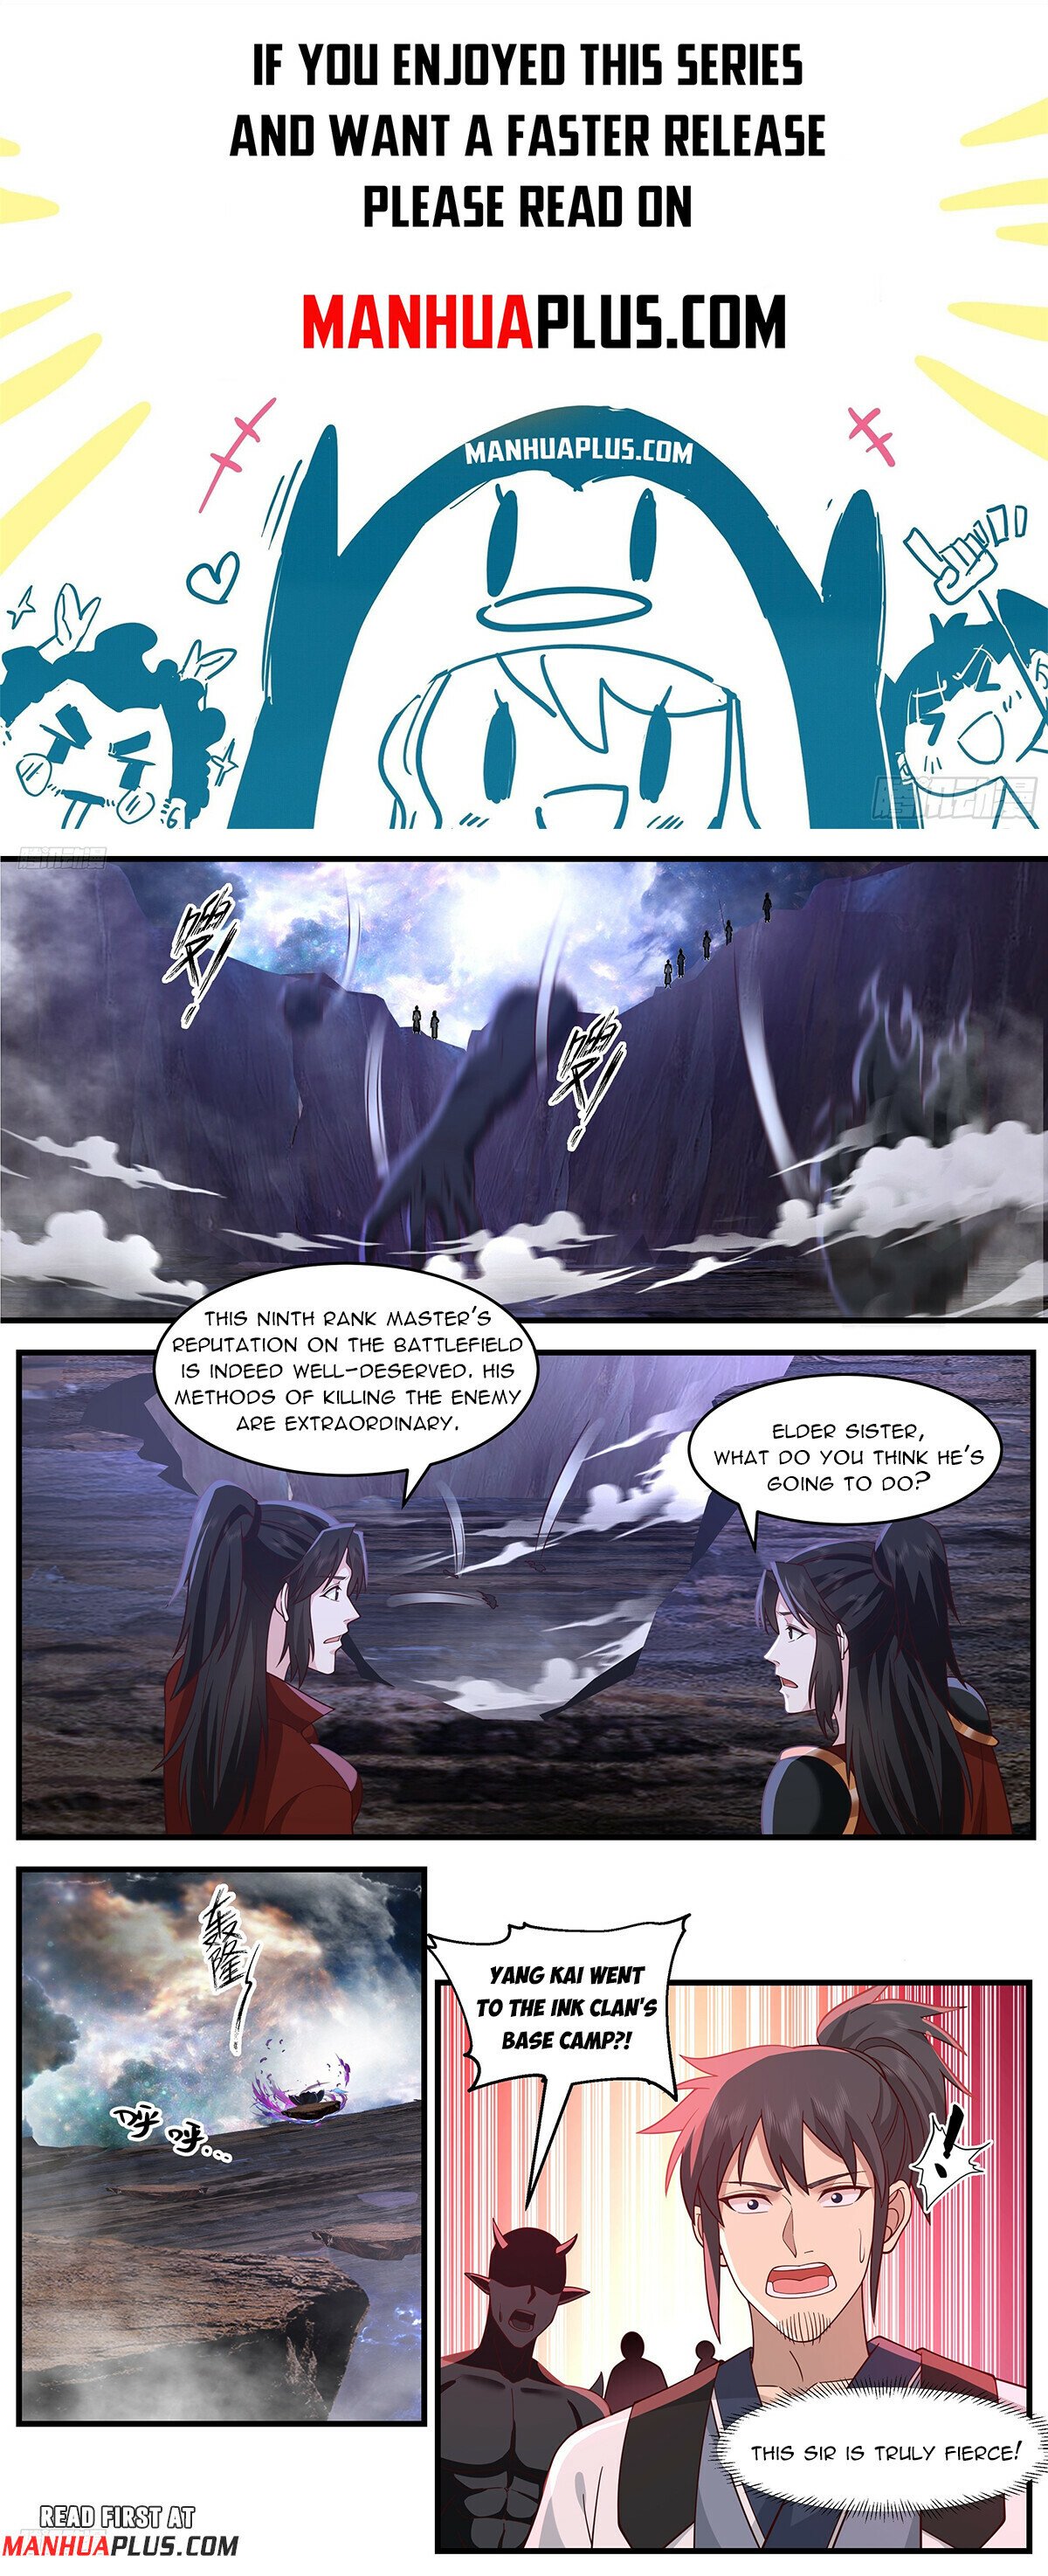 Martial Peak - Chapter 31525 - Retreat! As Soon As Possible! - Image 1